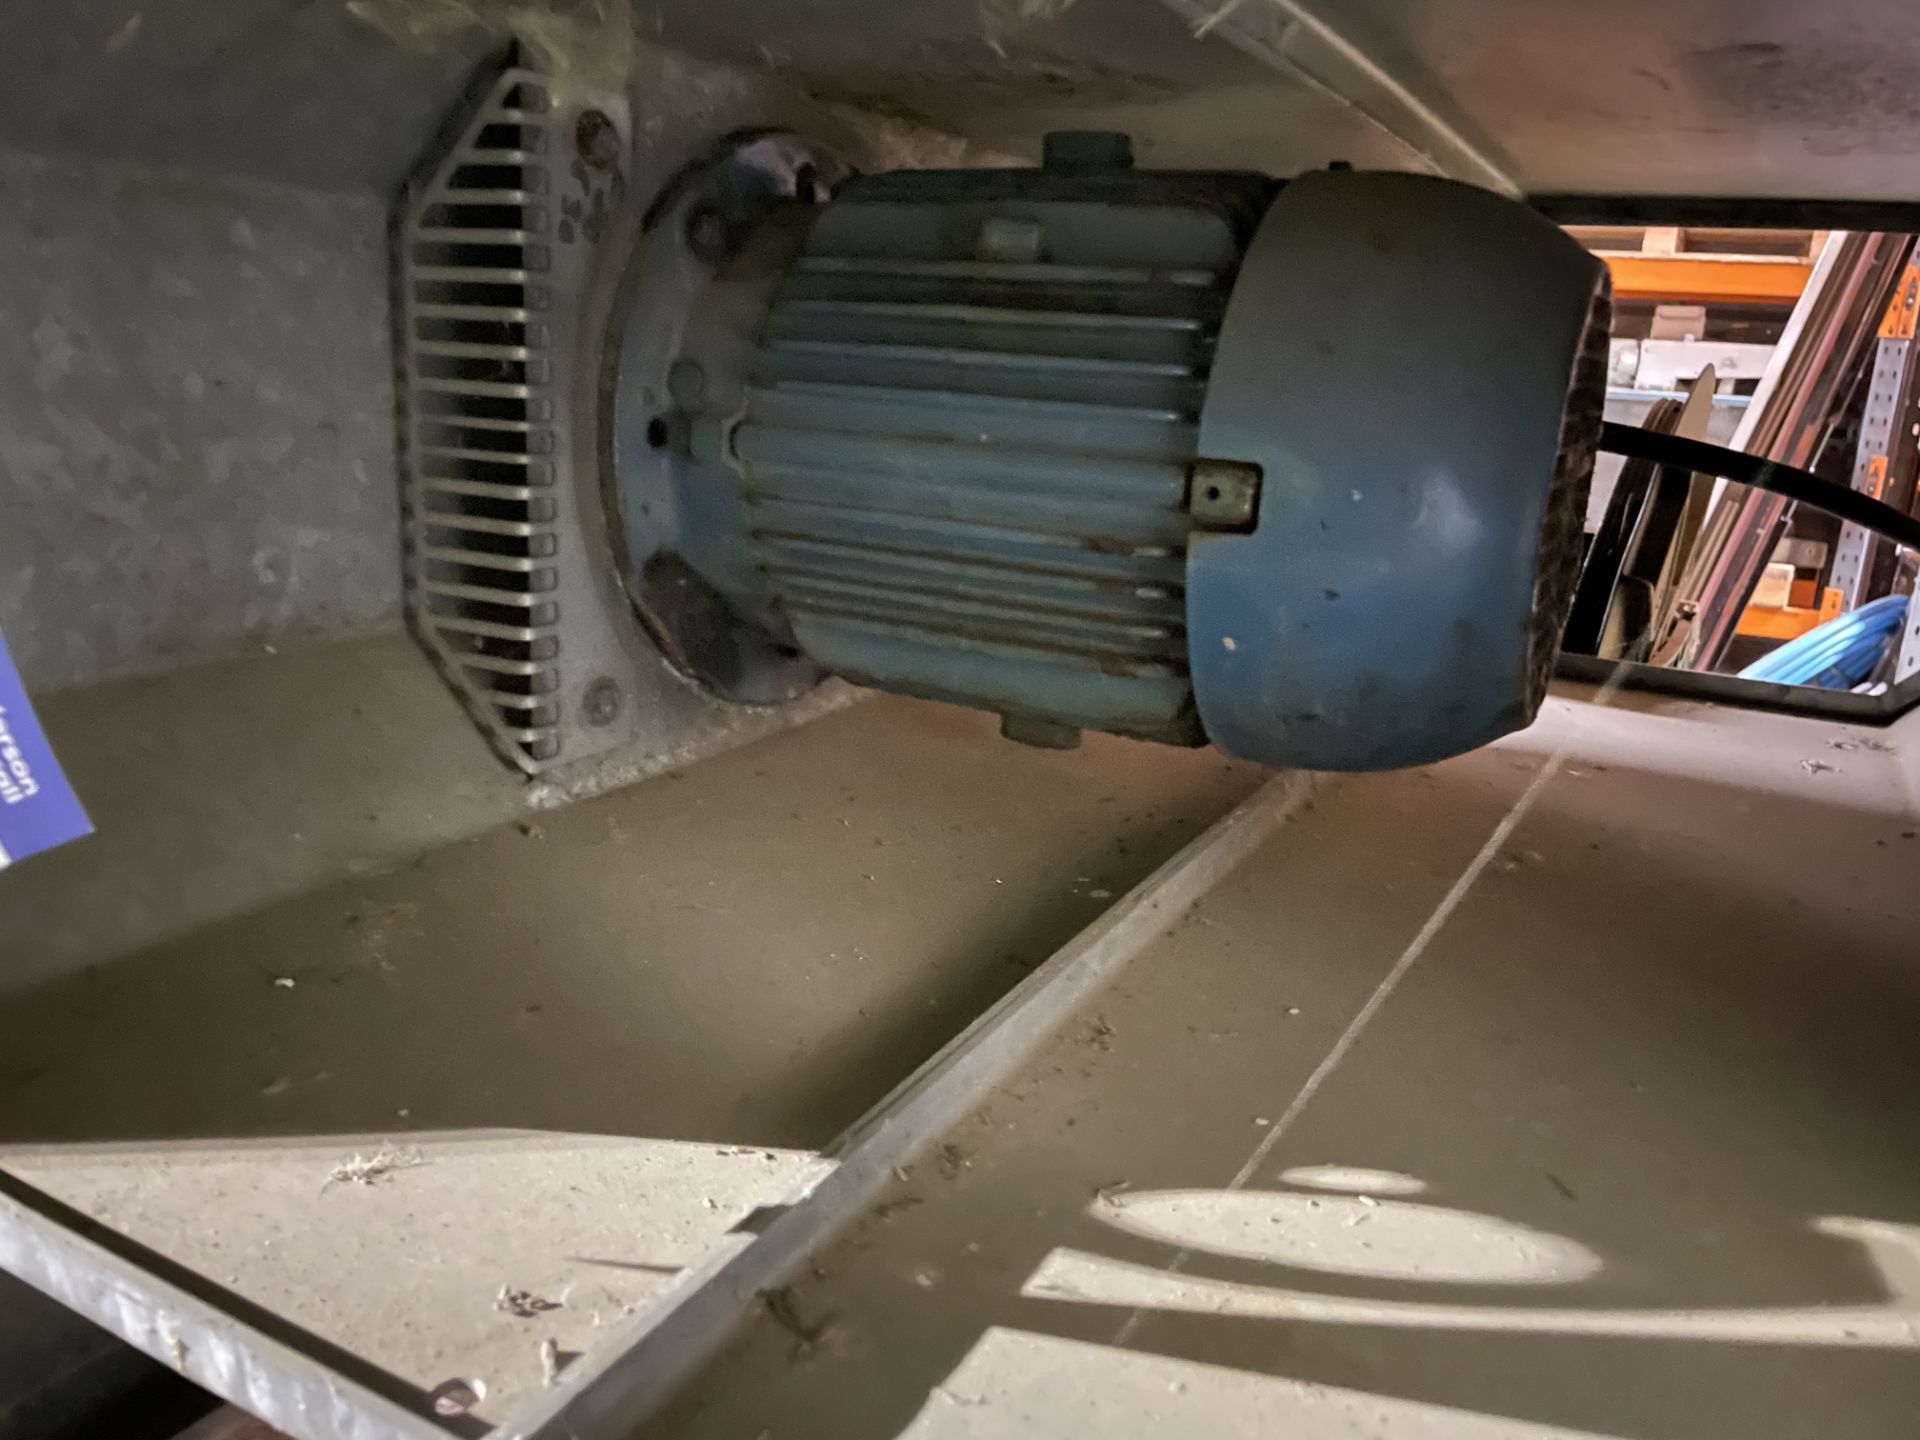 Stainless Steel Cased Bi-Furcated Fan, 600mm dia., - Image 2 of 3